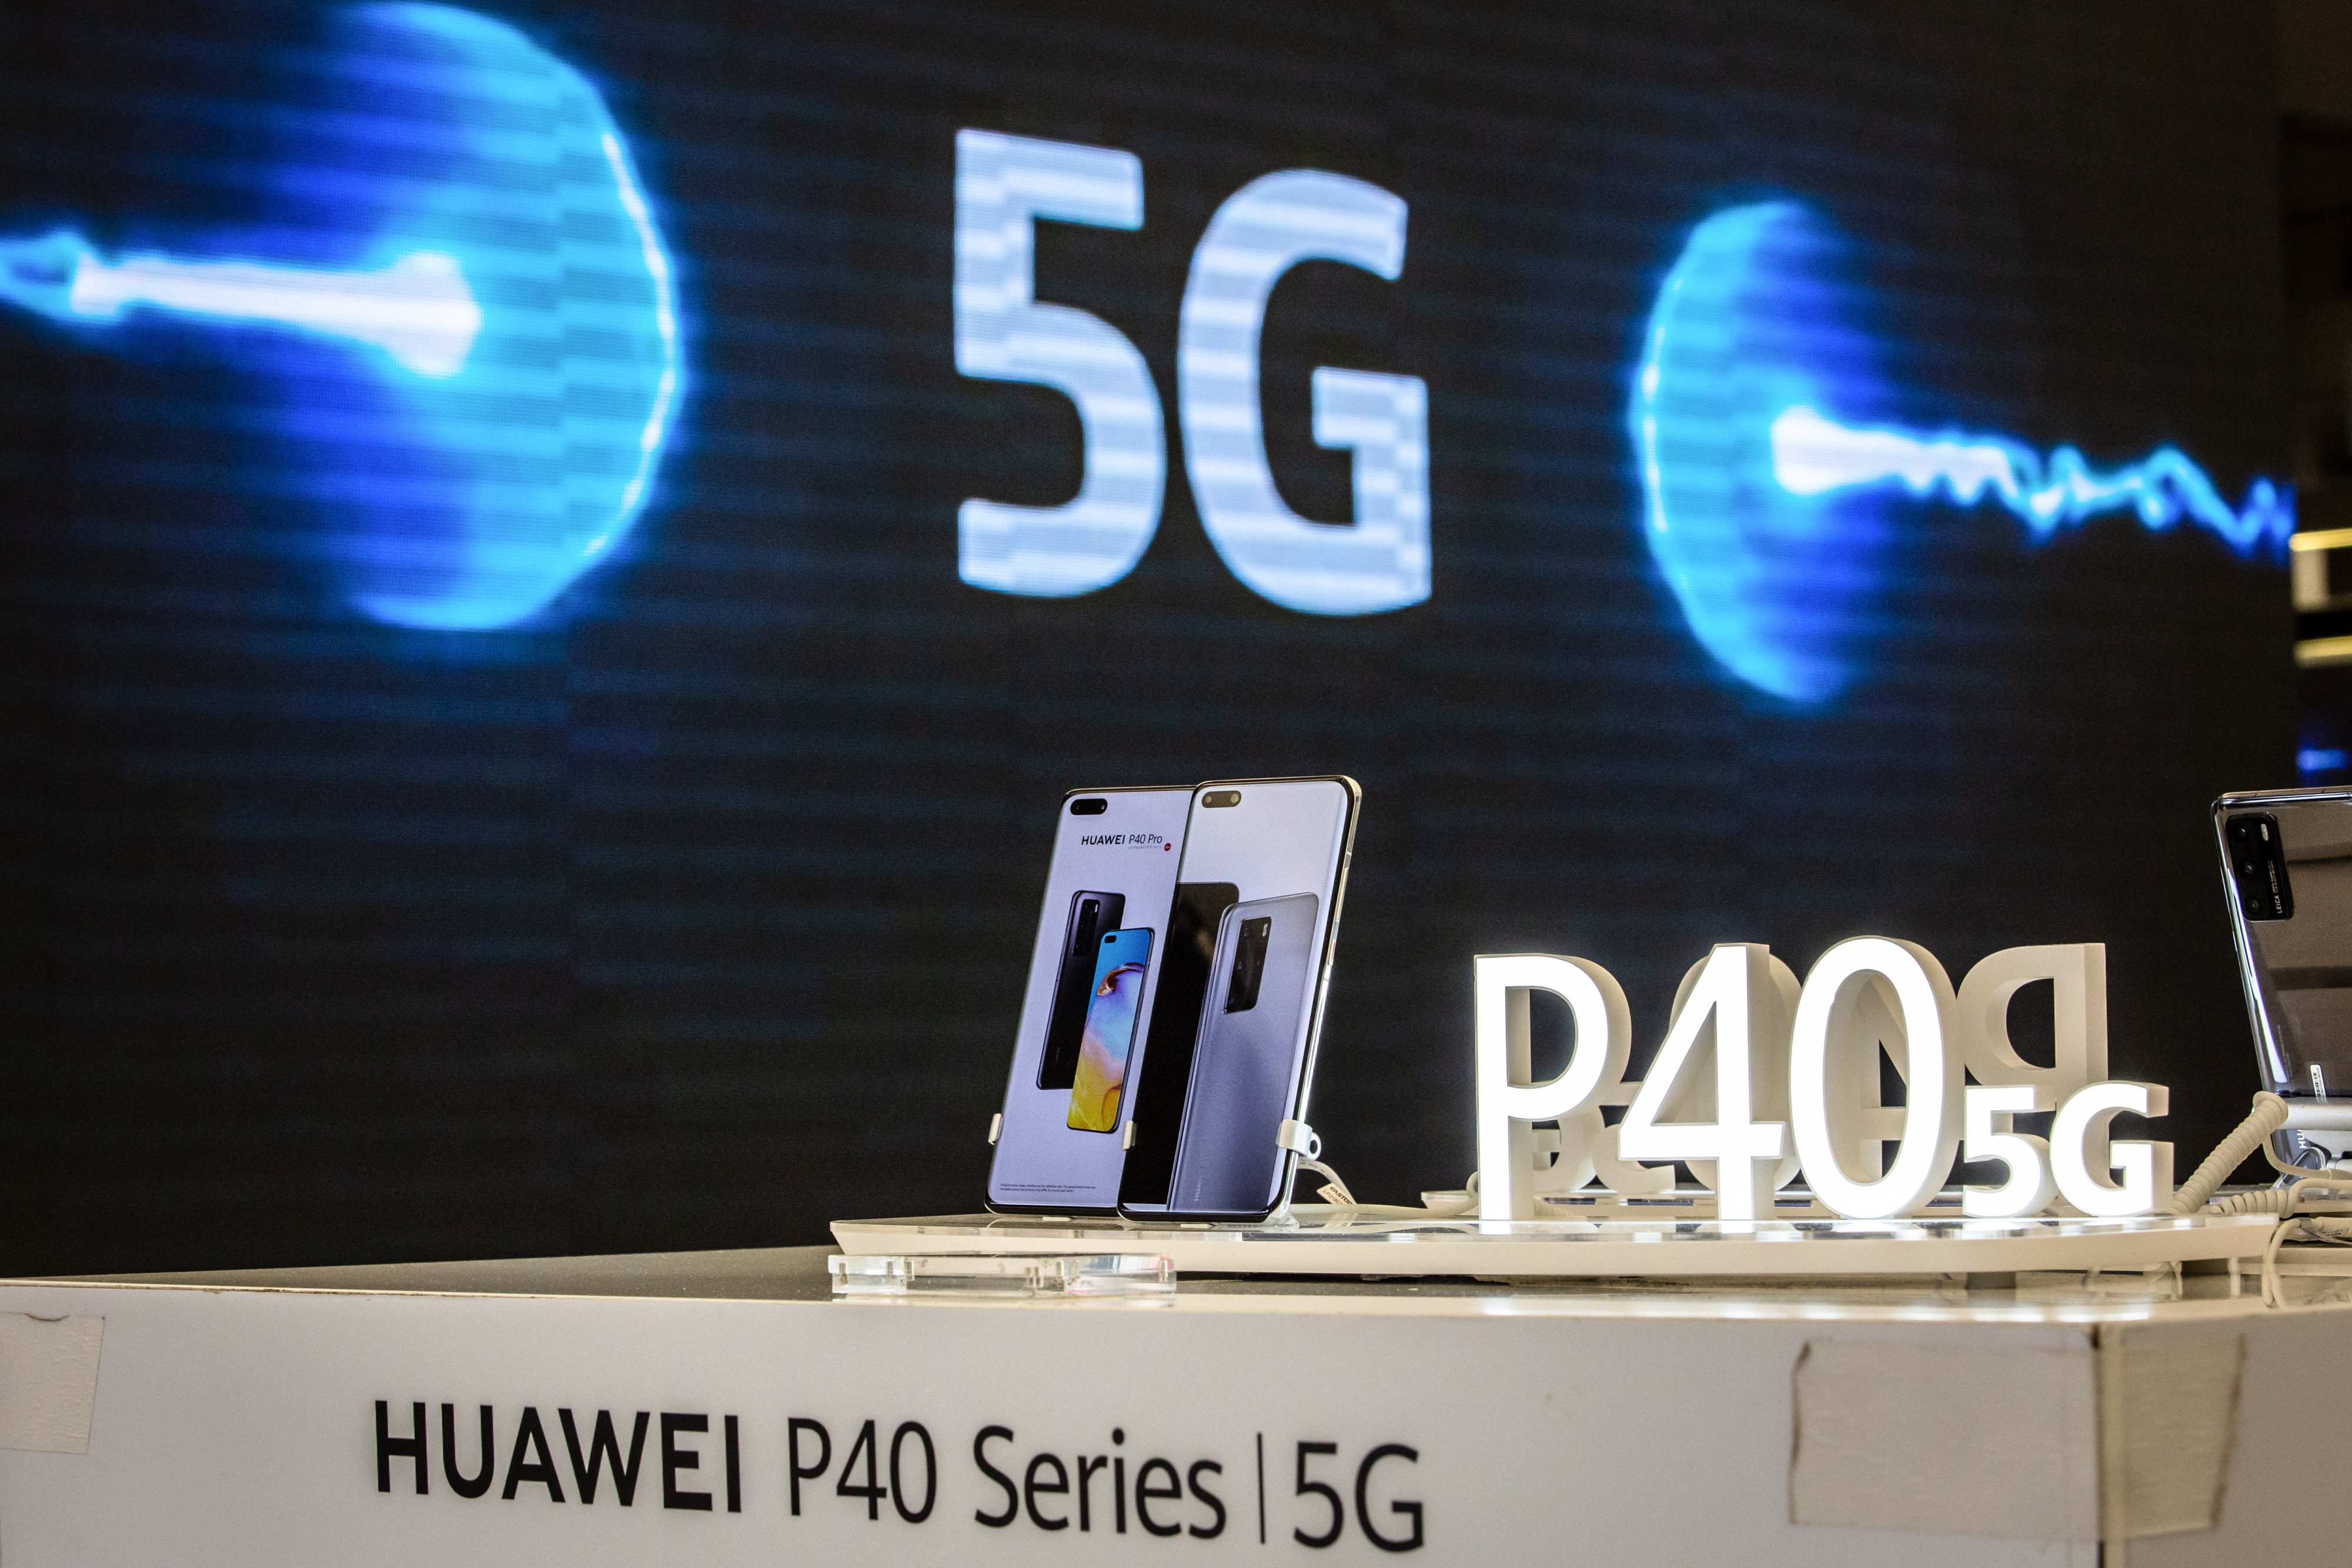 Huawei P40 series 5G smartphones on display inside the Movistar Centre in Barcelona on January 21, 2021. Many European countries are adopting a position similar to that of the US on Huawei. Photo: Bloomberg